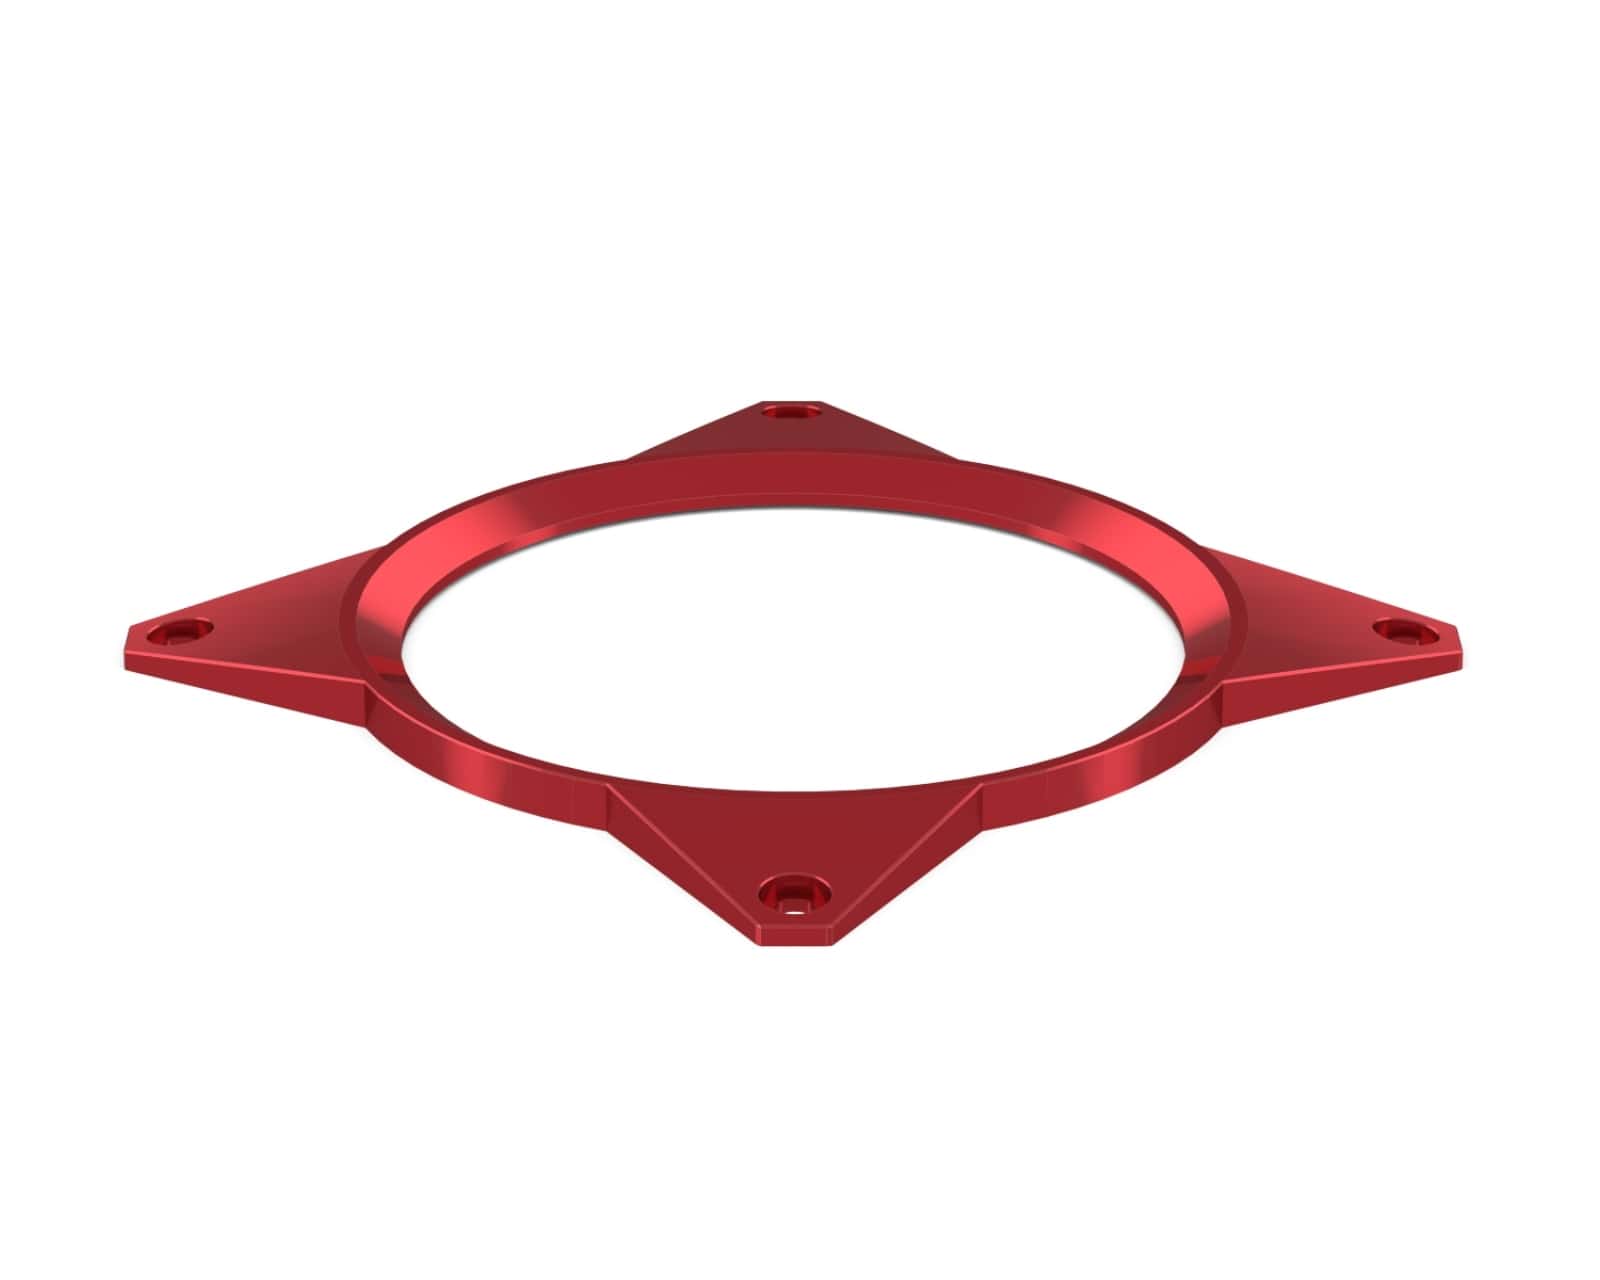 PrimoChill 140mm Aluminum SX Fan Cover - PrimoChill - KEEPING IT COOL Candy Red